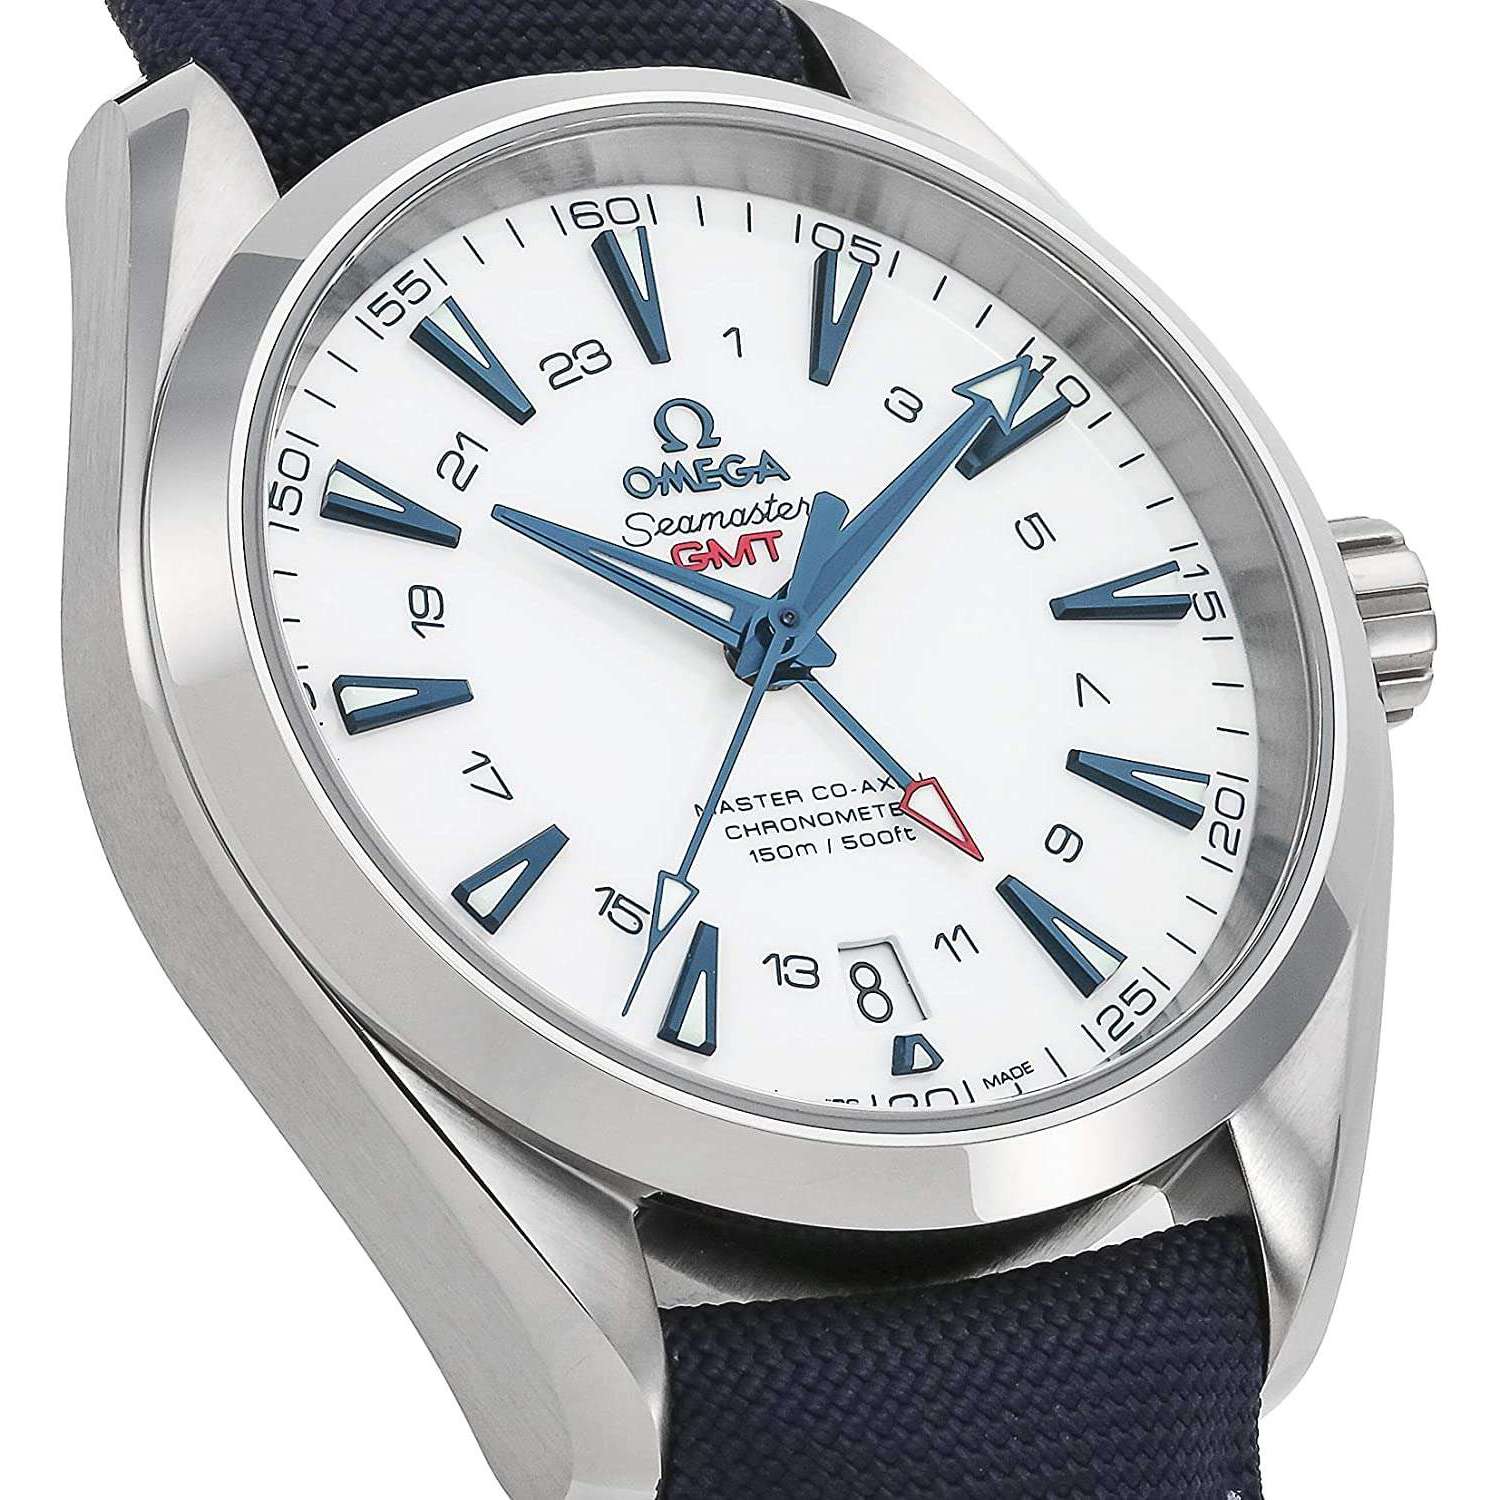 ROOK JAPAN:OMEGA SEAMASTER GMT MASTER CO-AXIAL CHRONOMETER 41 MM MEN WATCH 231.92.43.22.04.001,Luxury Watch,Omega